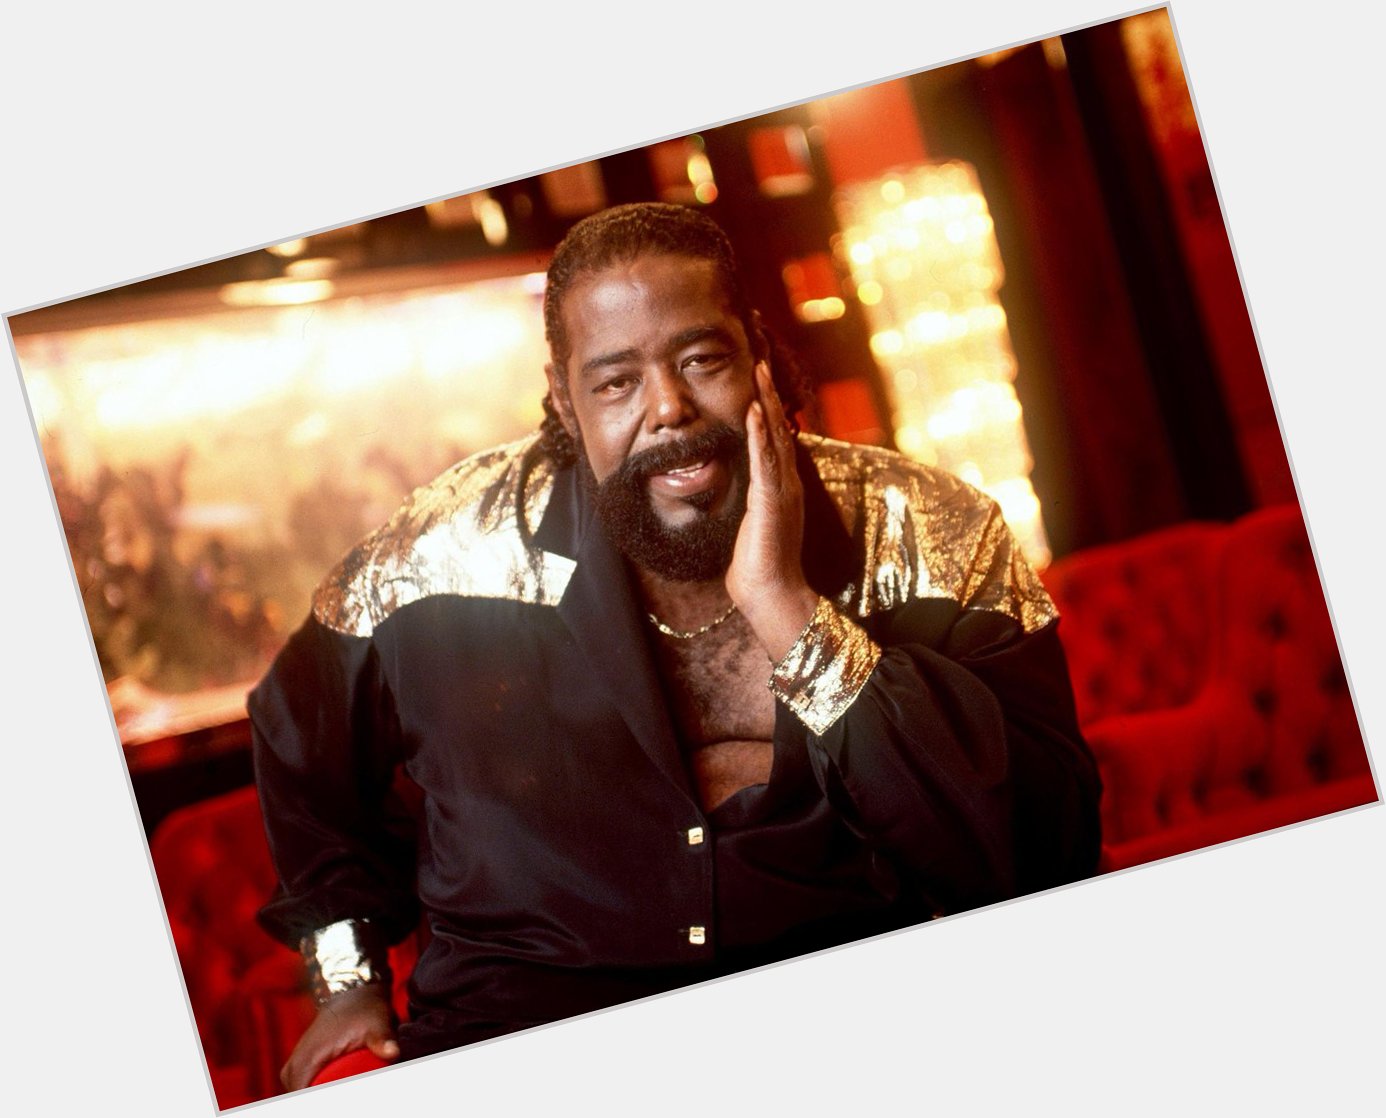 Happy birthday Barry White ! Today would\ve been his 71st birthday. RIP 